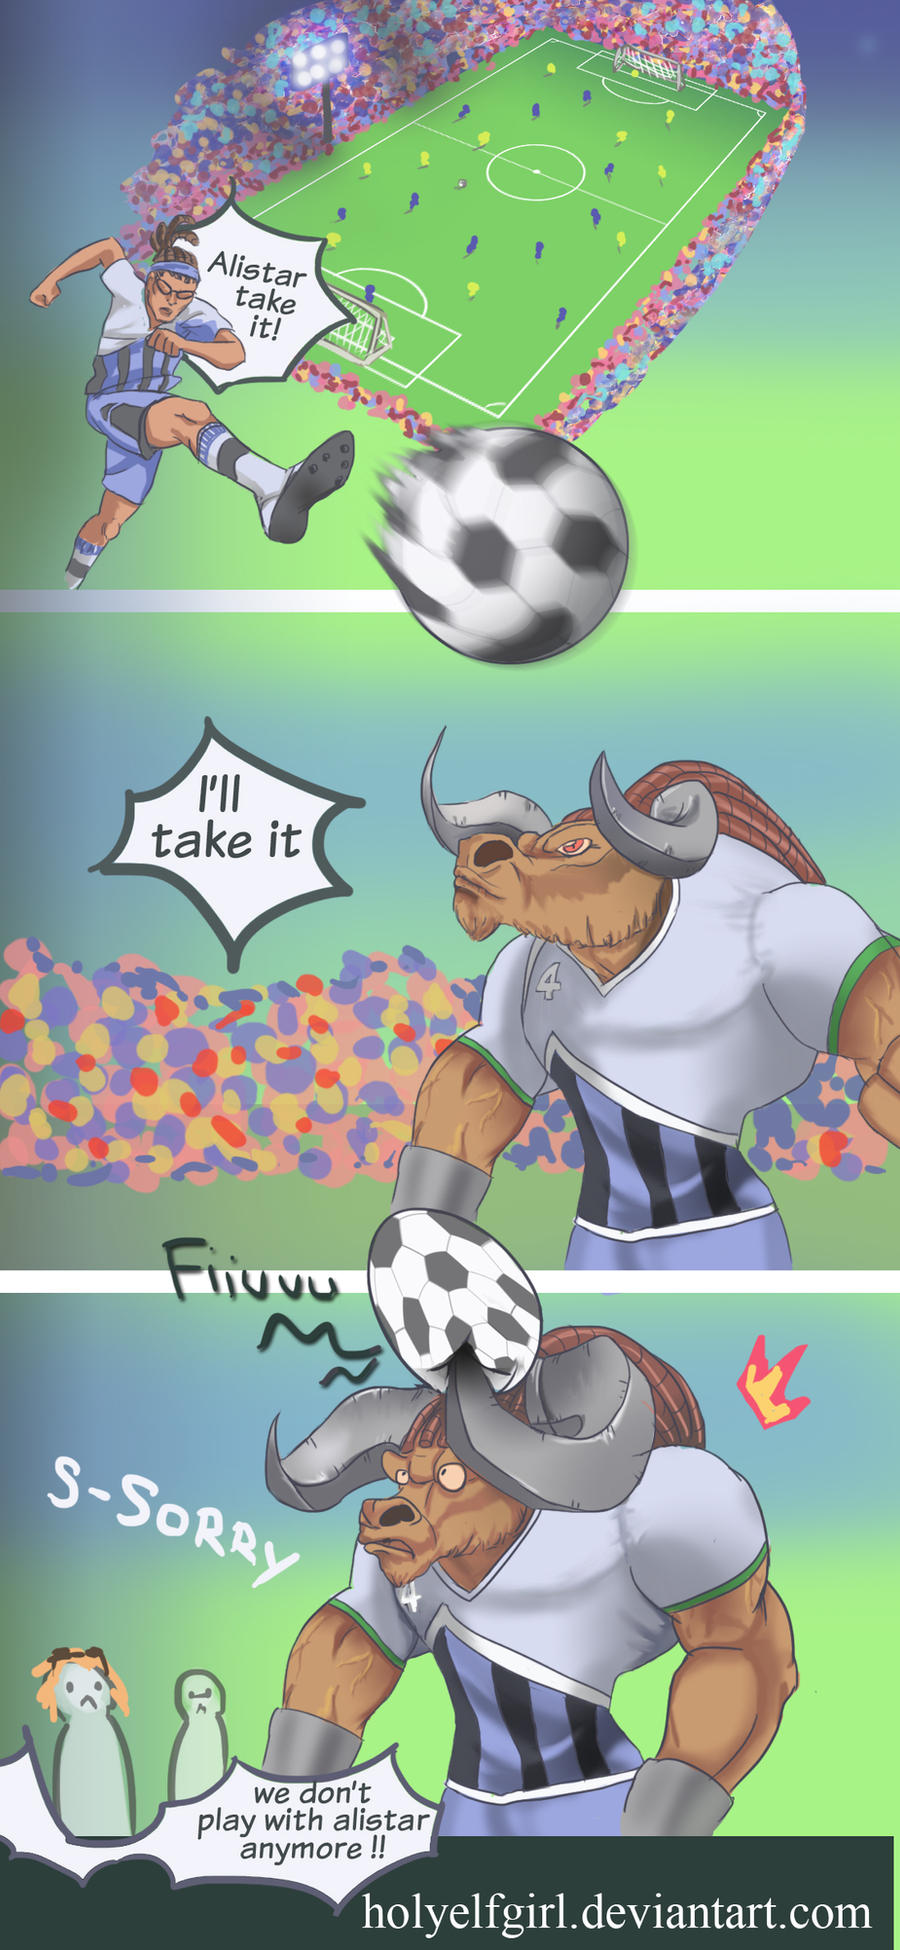 World cup on League of Legends